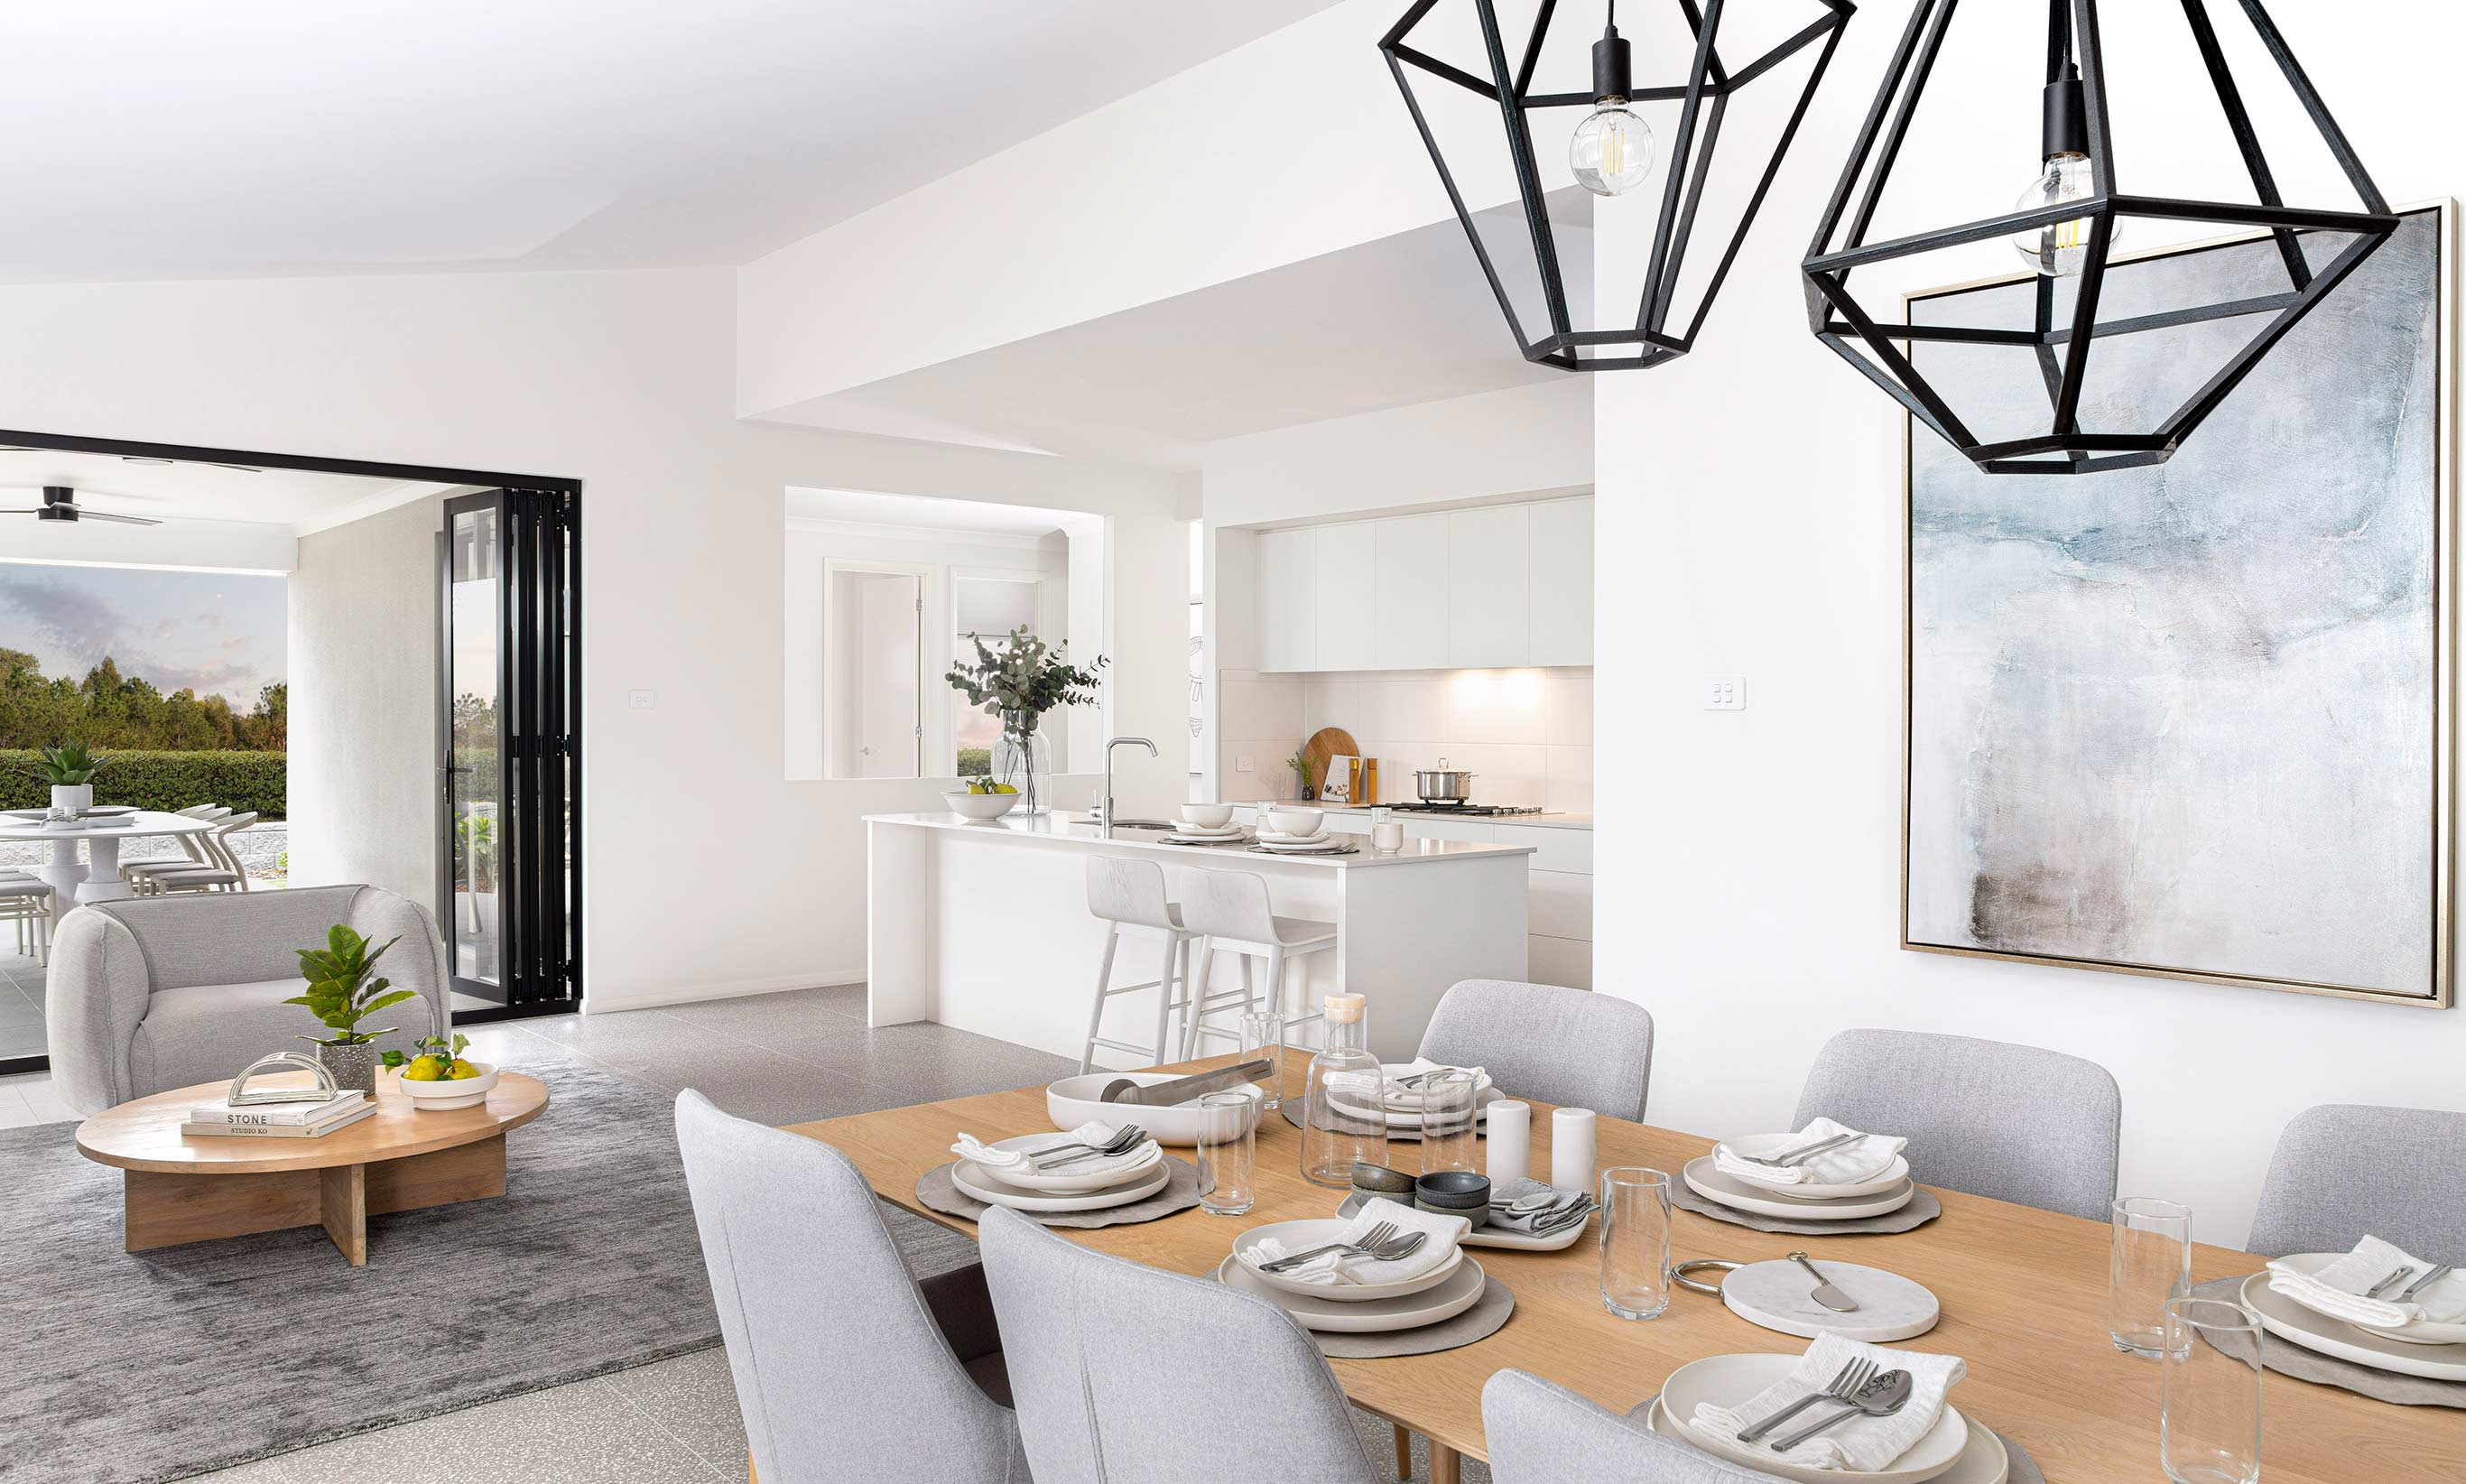 Contempo Minimalist style creates an easy welcoming home with a focus on high functionality and effortless living.